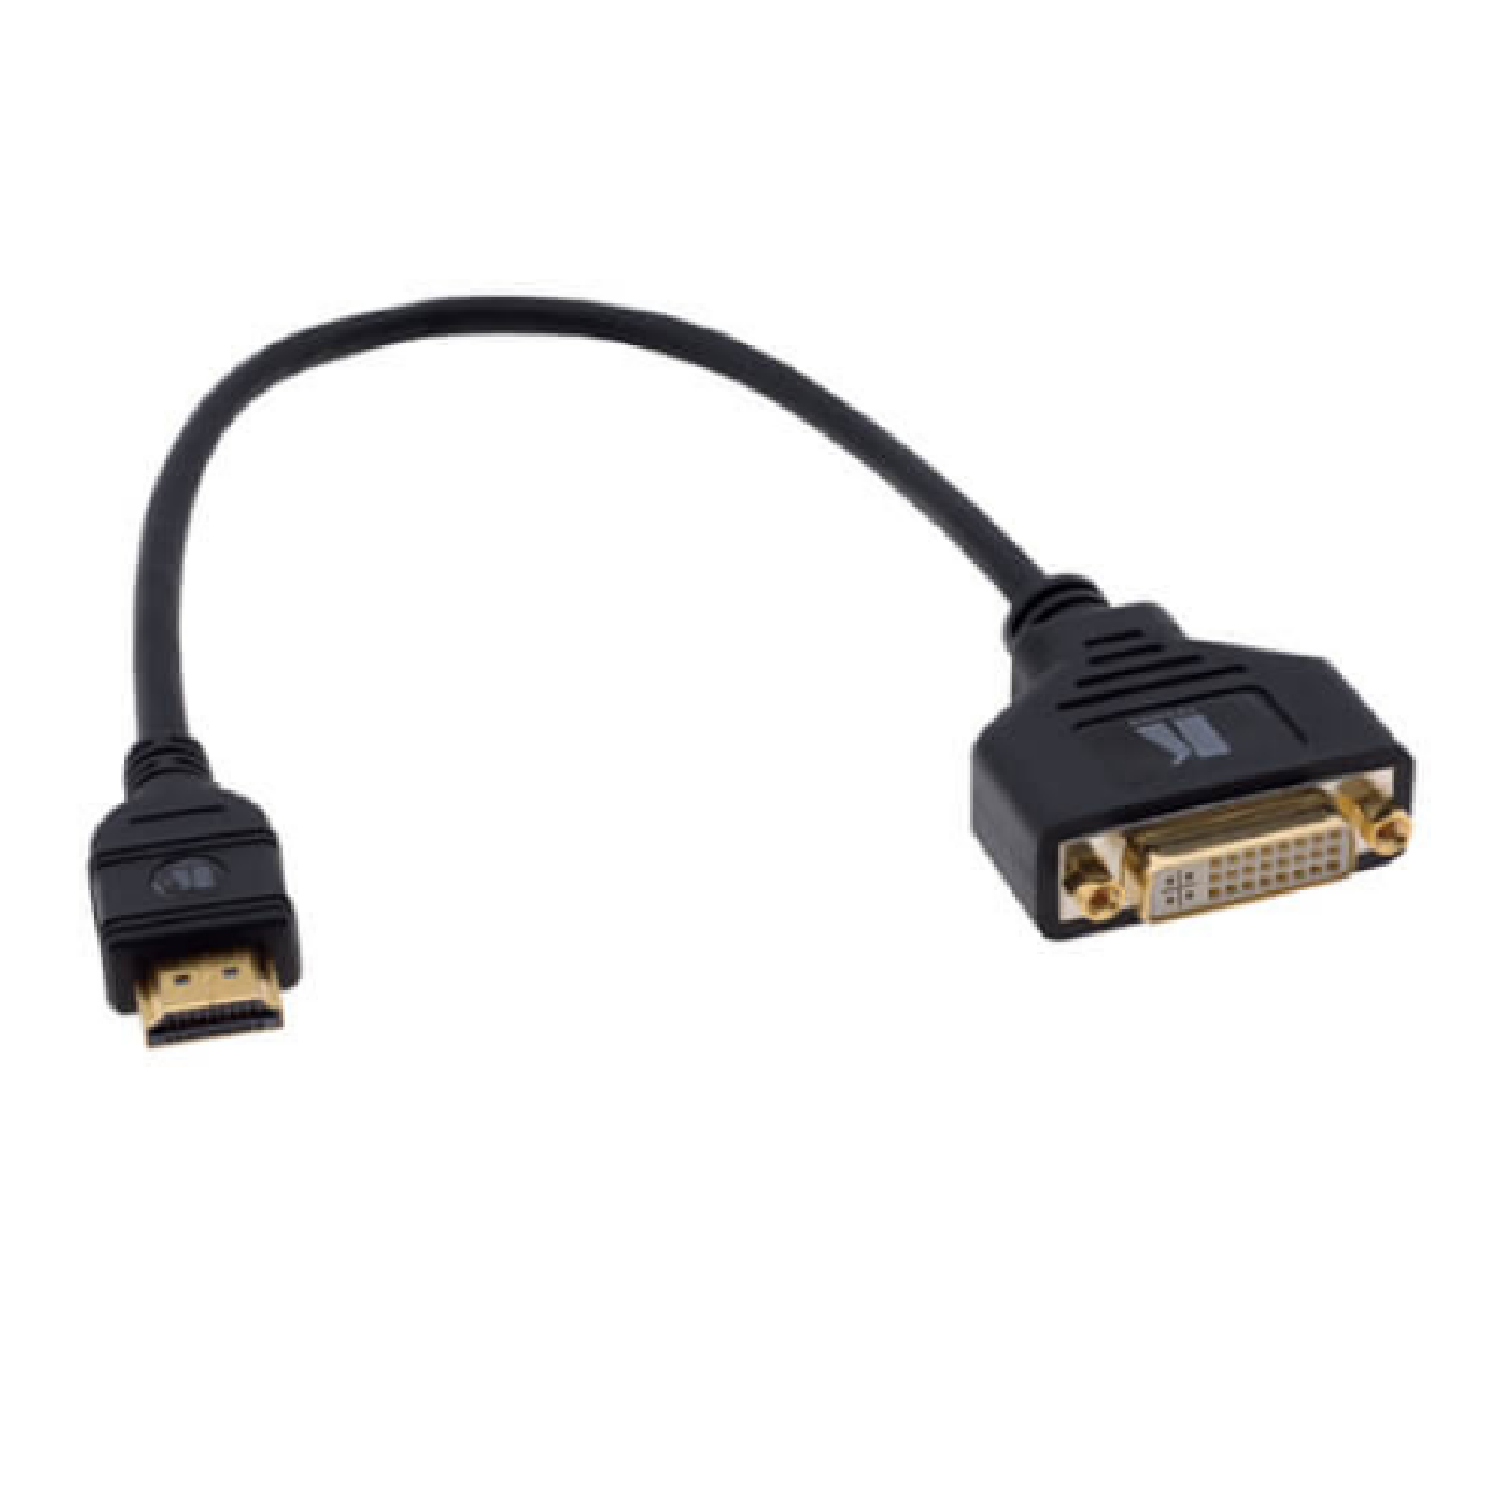 DVI-I (F) to HDMI (M) Adapter Cable   ADCDF/HM kramer